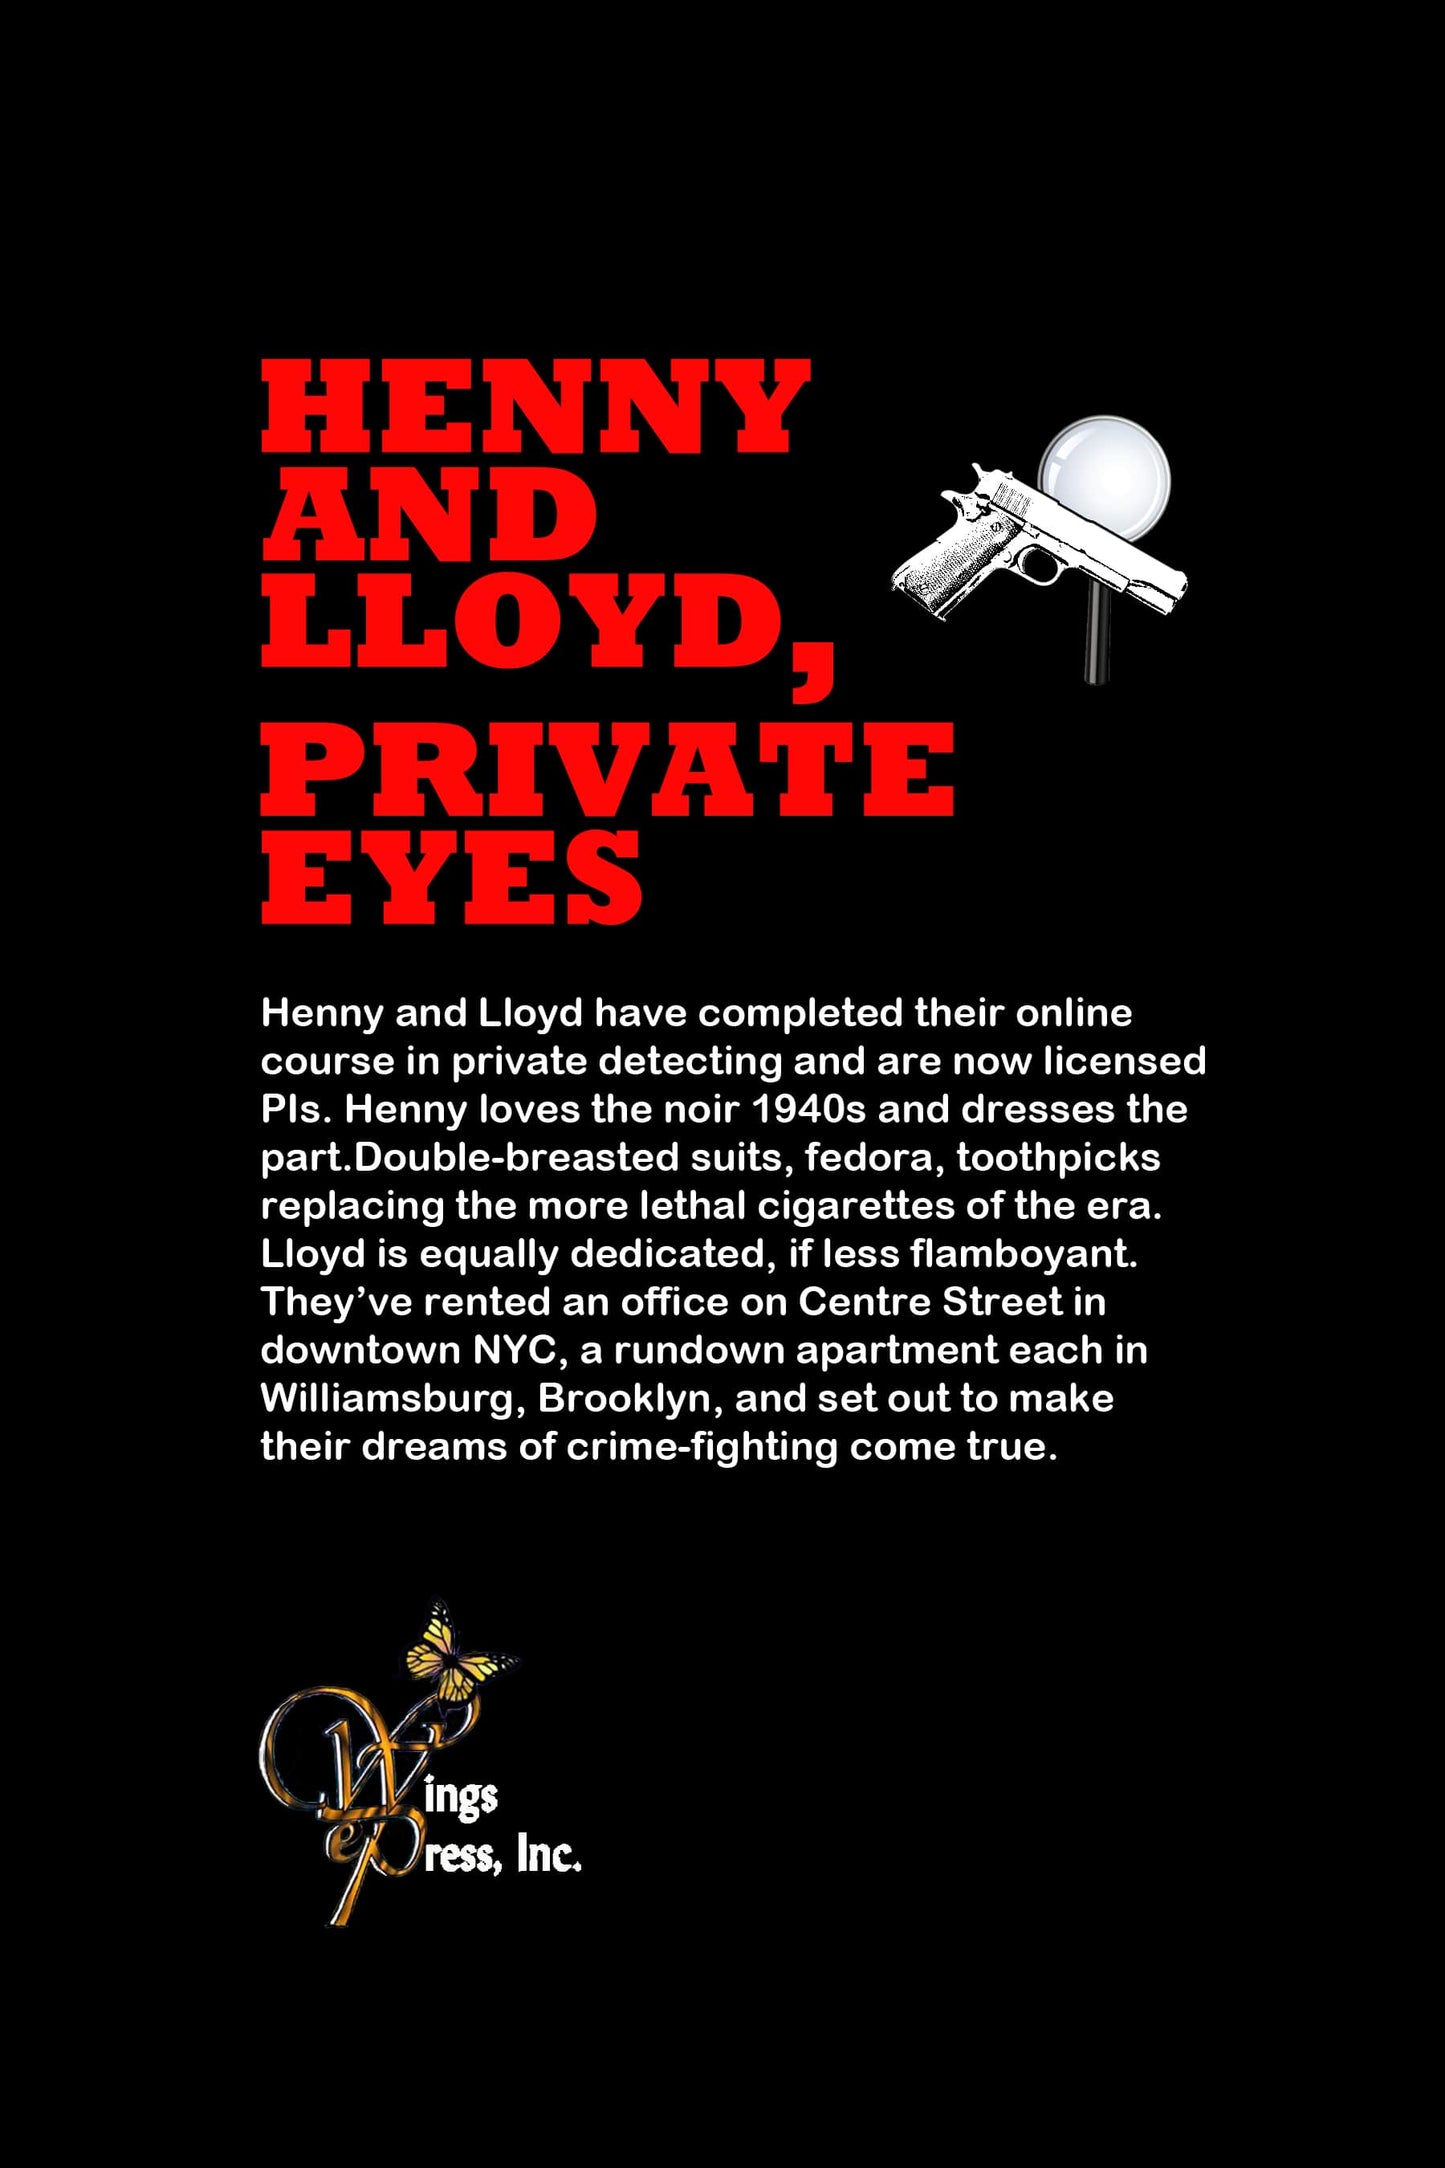 Henny and Lloyd, Private Eyes